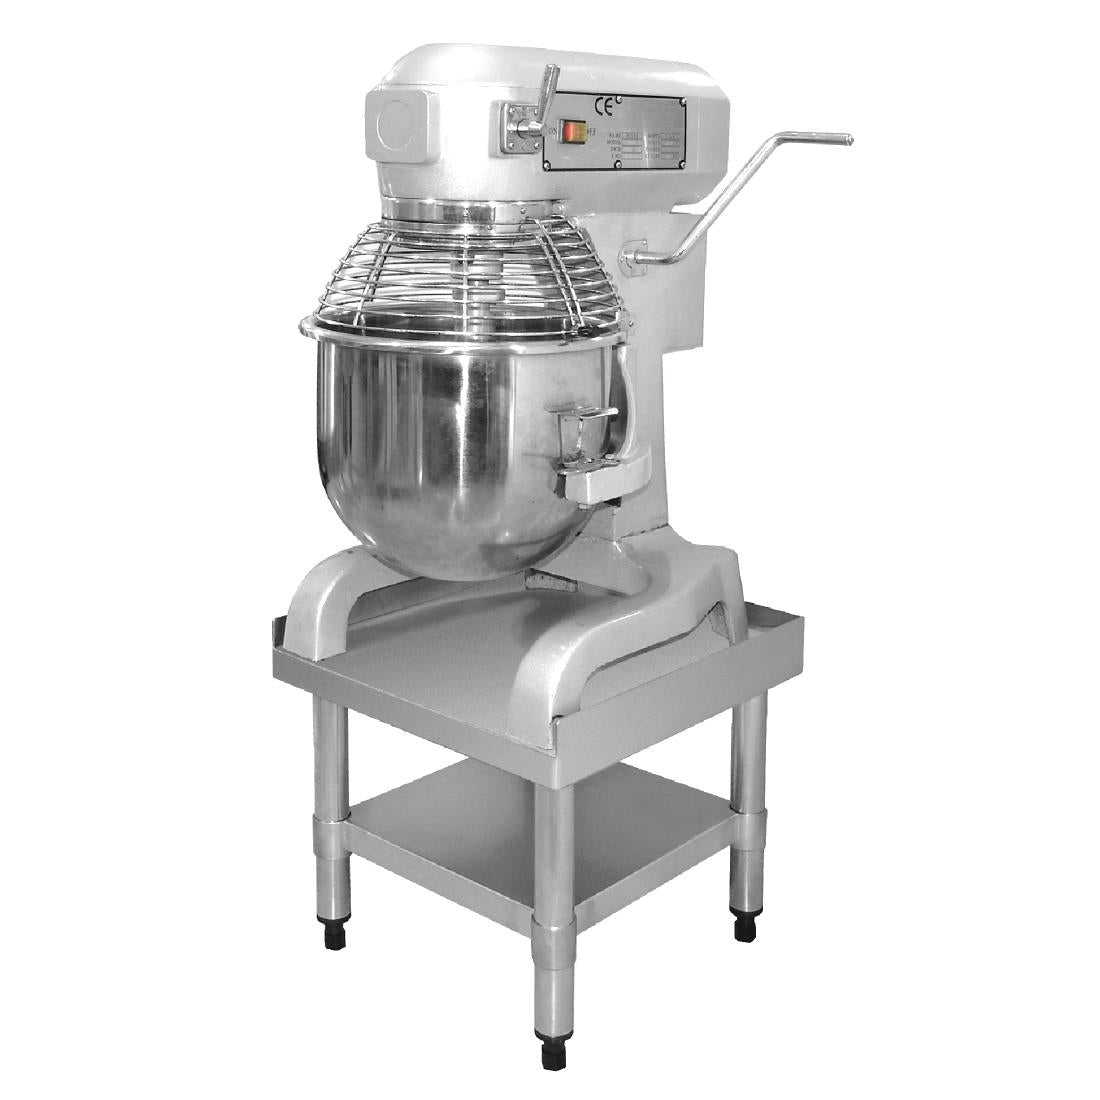 GD891 Buffalo Planetary Mixer Stand JD Catering Equipment Solutions Ltd